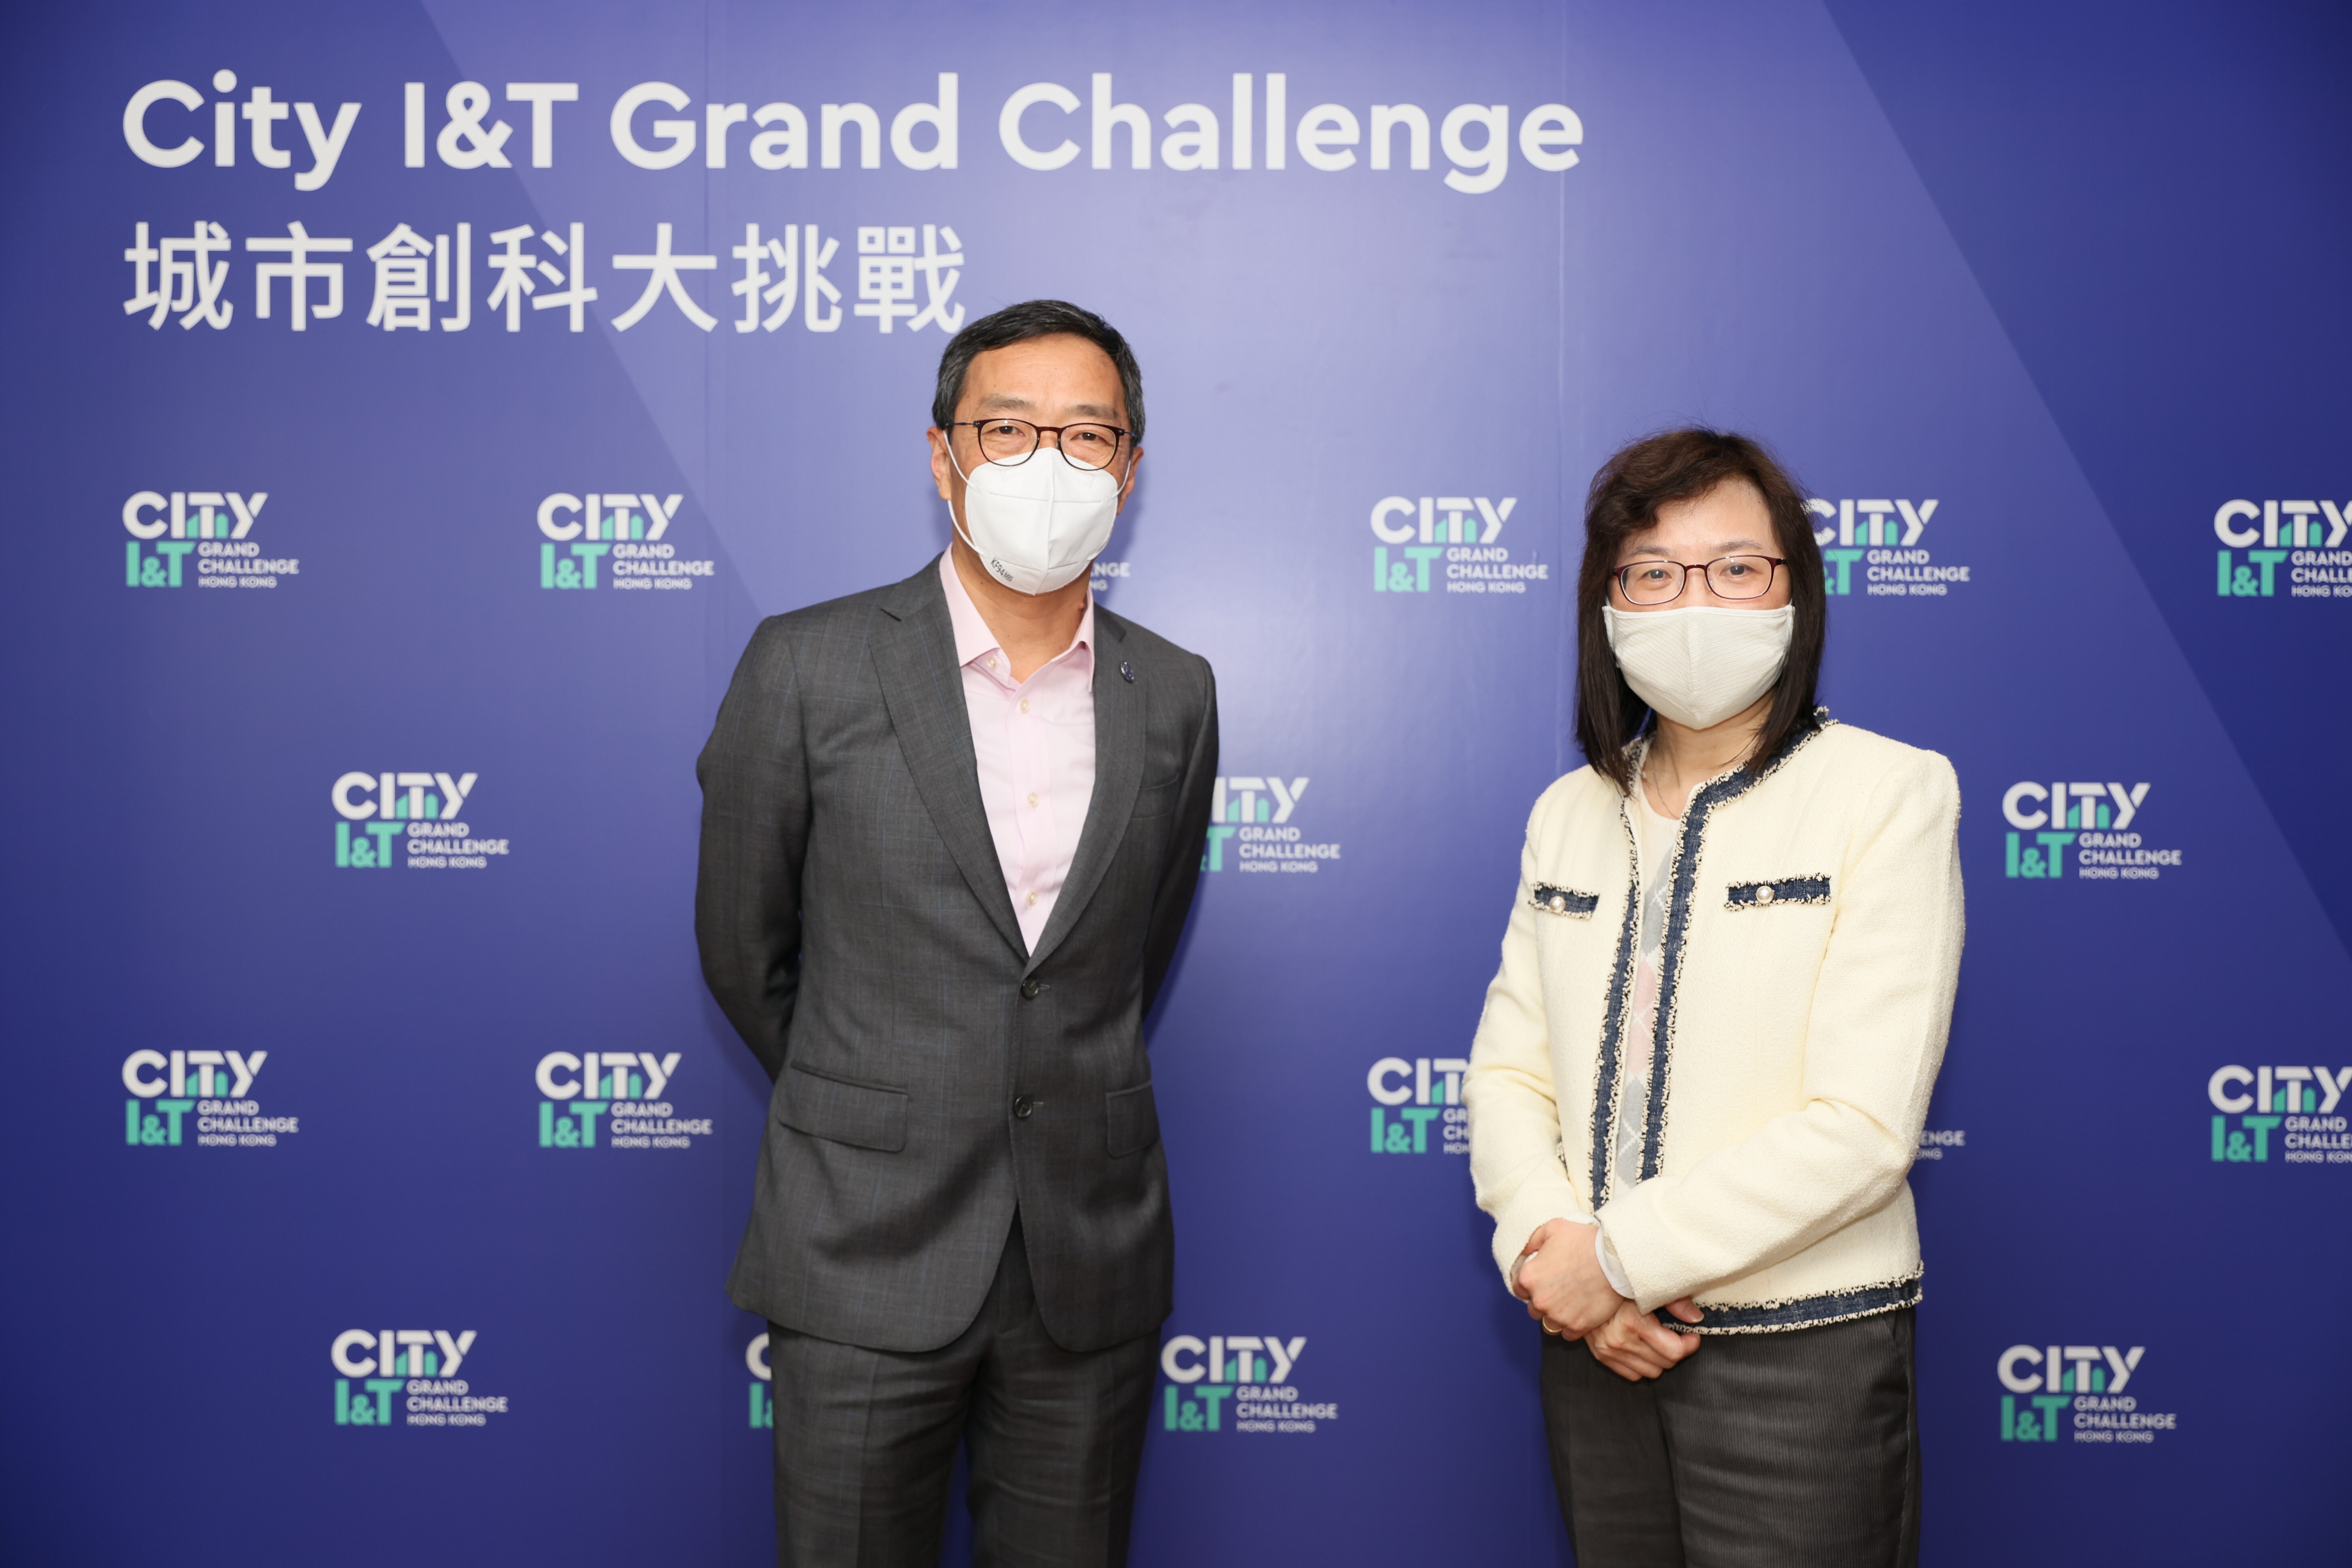 Albert Wong (left), CEO of Hong Kong Science and Technology Parks Corporation, and Rebecca Pun, Hong Kong’s commissioner for innovation and technology, hope the City I&T Grand Challenge will attract innovative smart city ideas from around the world.